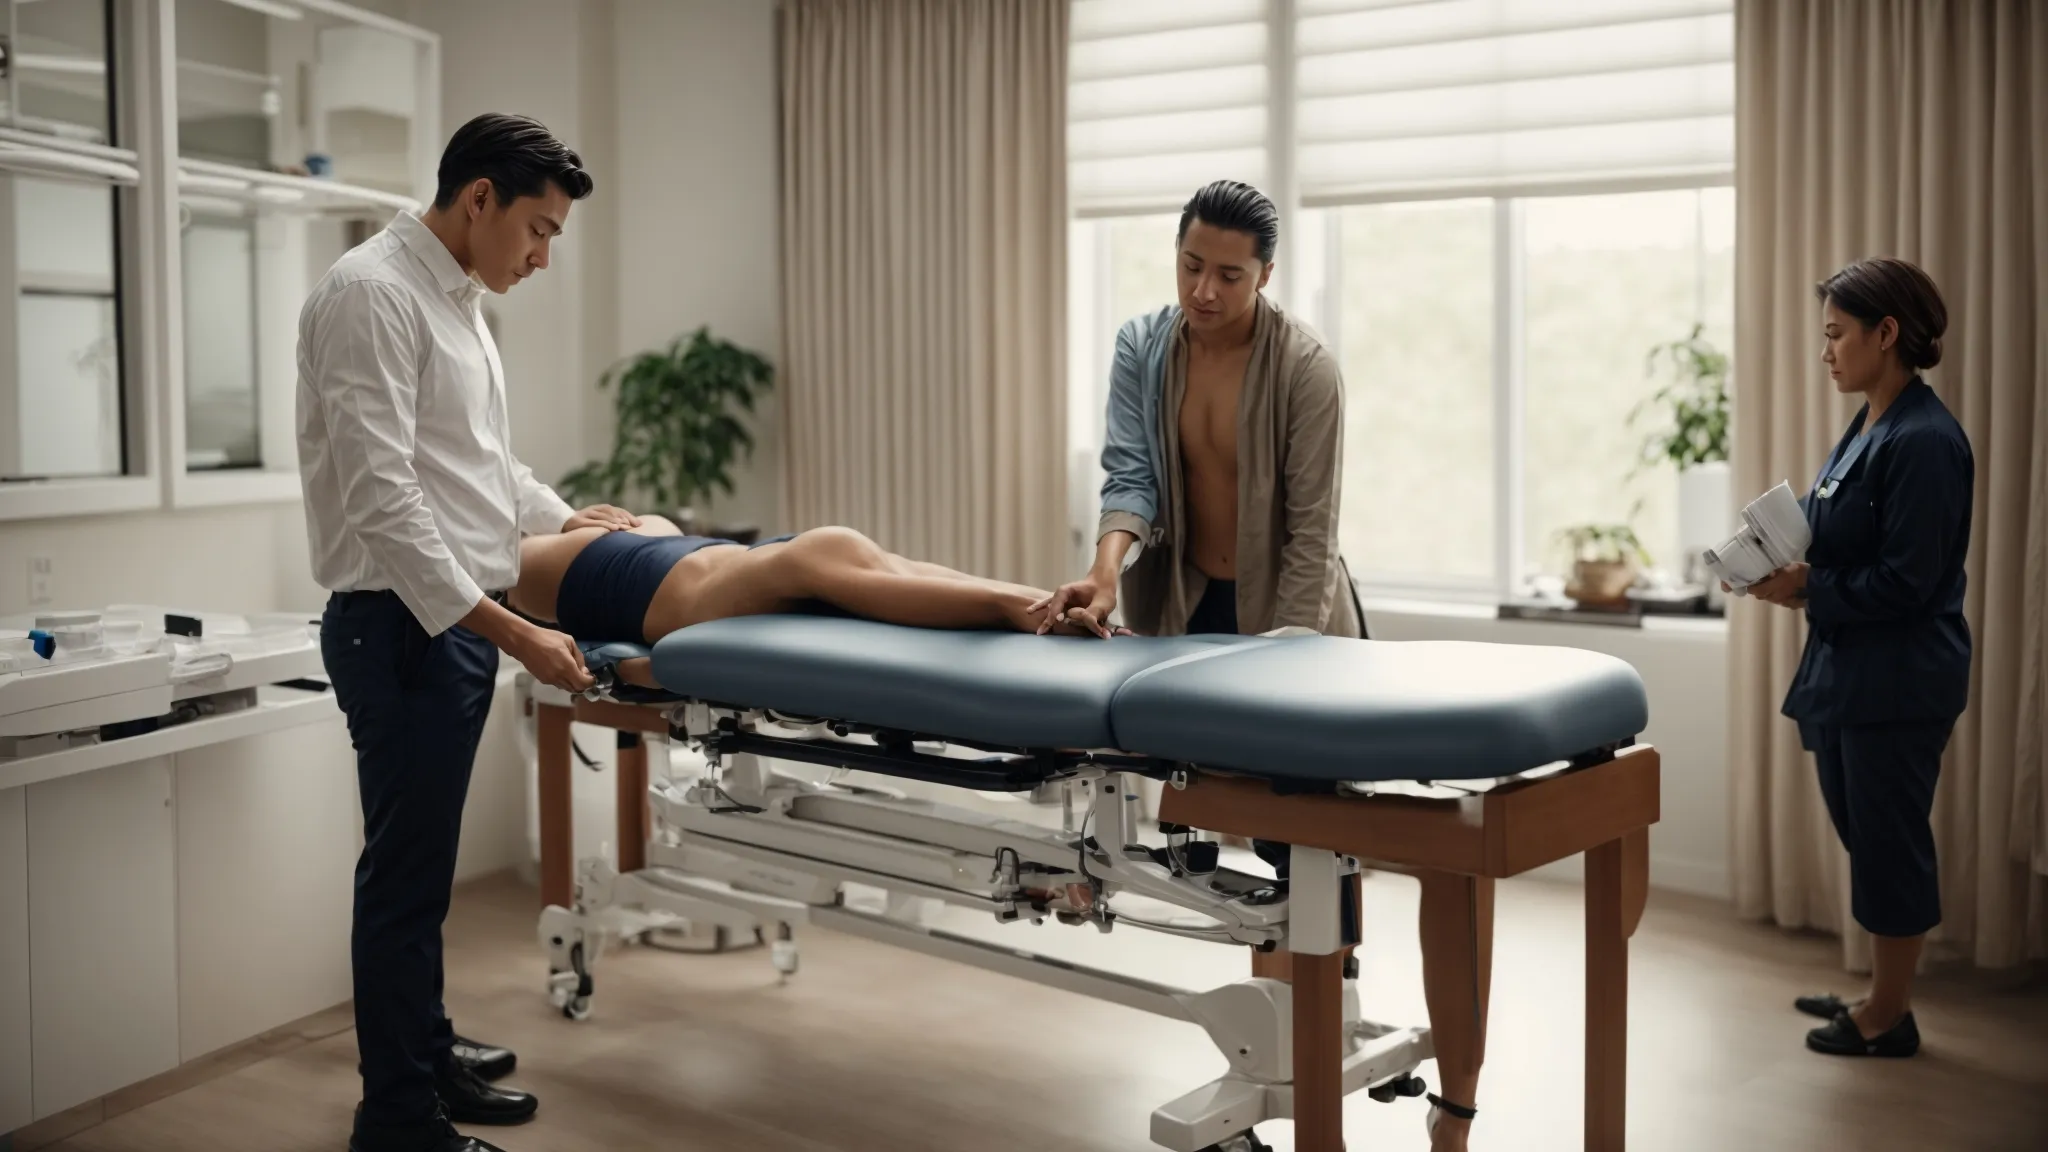 a chiropractor prepares to adjust a patient's lower back using a specialized drop table in a clinic setting.